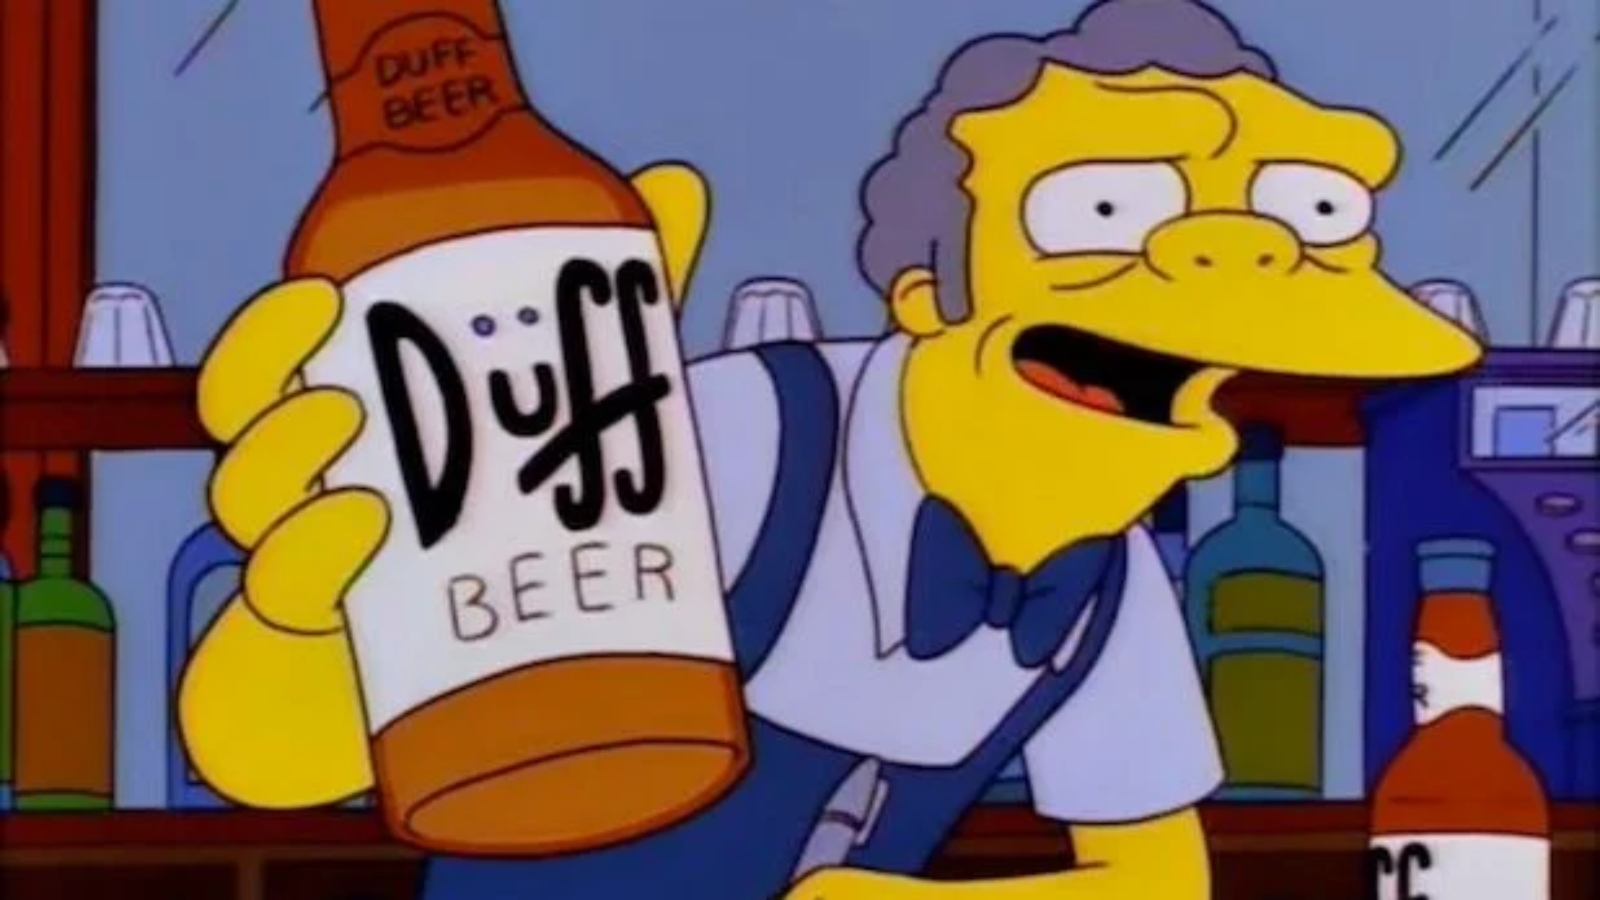 Moe from The Simpsons holding Duff Beer